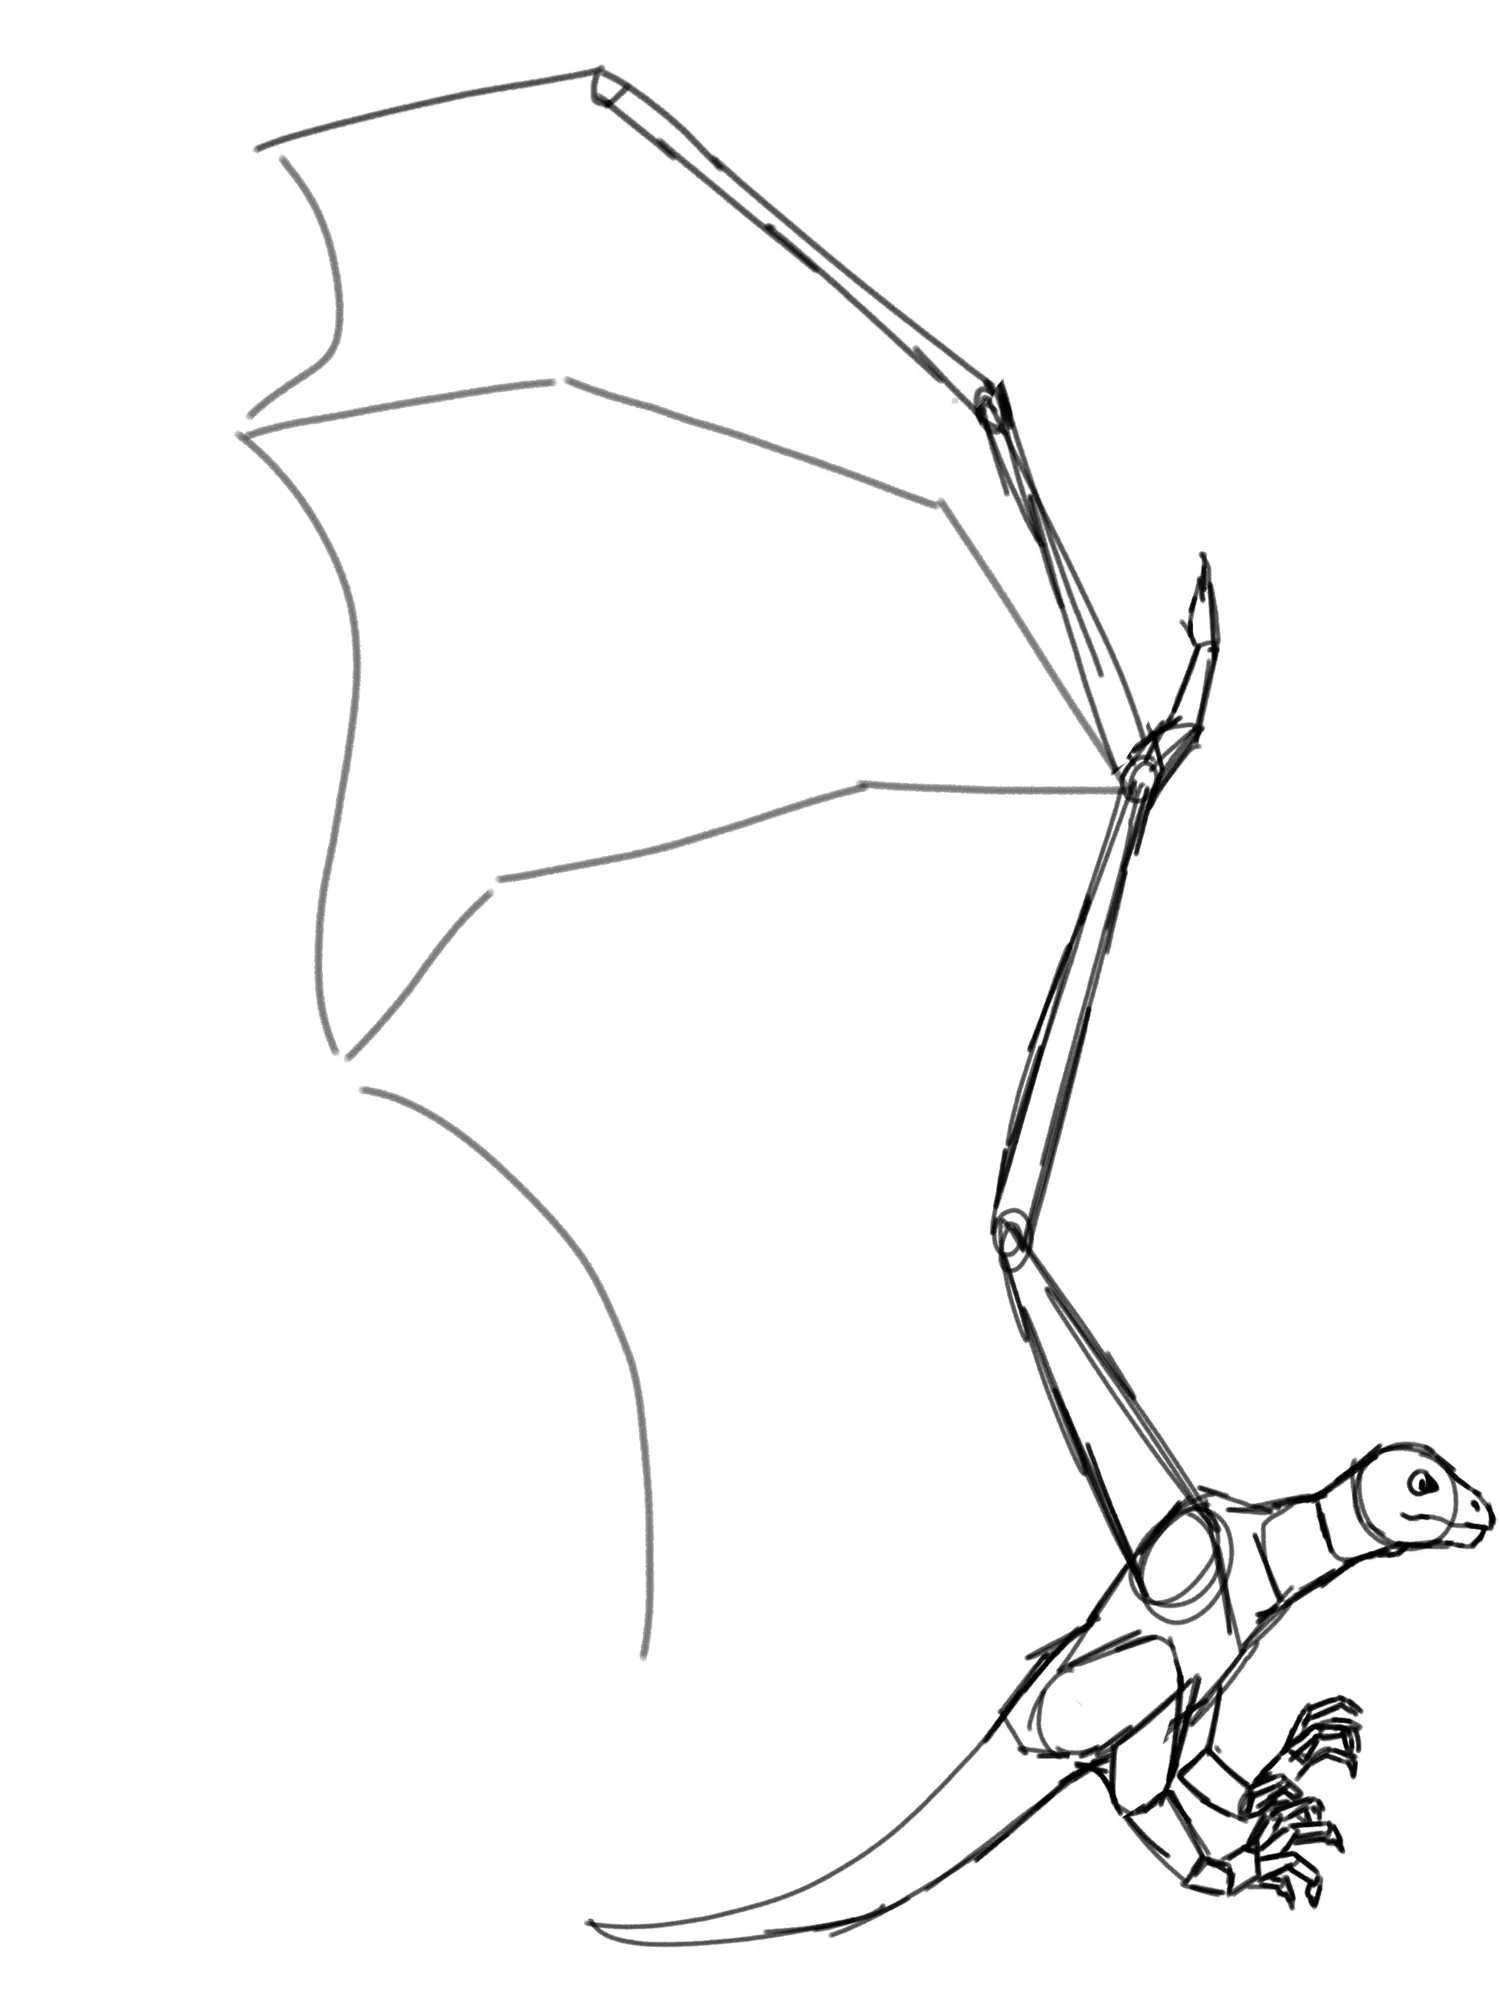 A bat winged dinosaur mid-flight, wings spreading upwards and claws extended like an eagle.